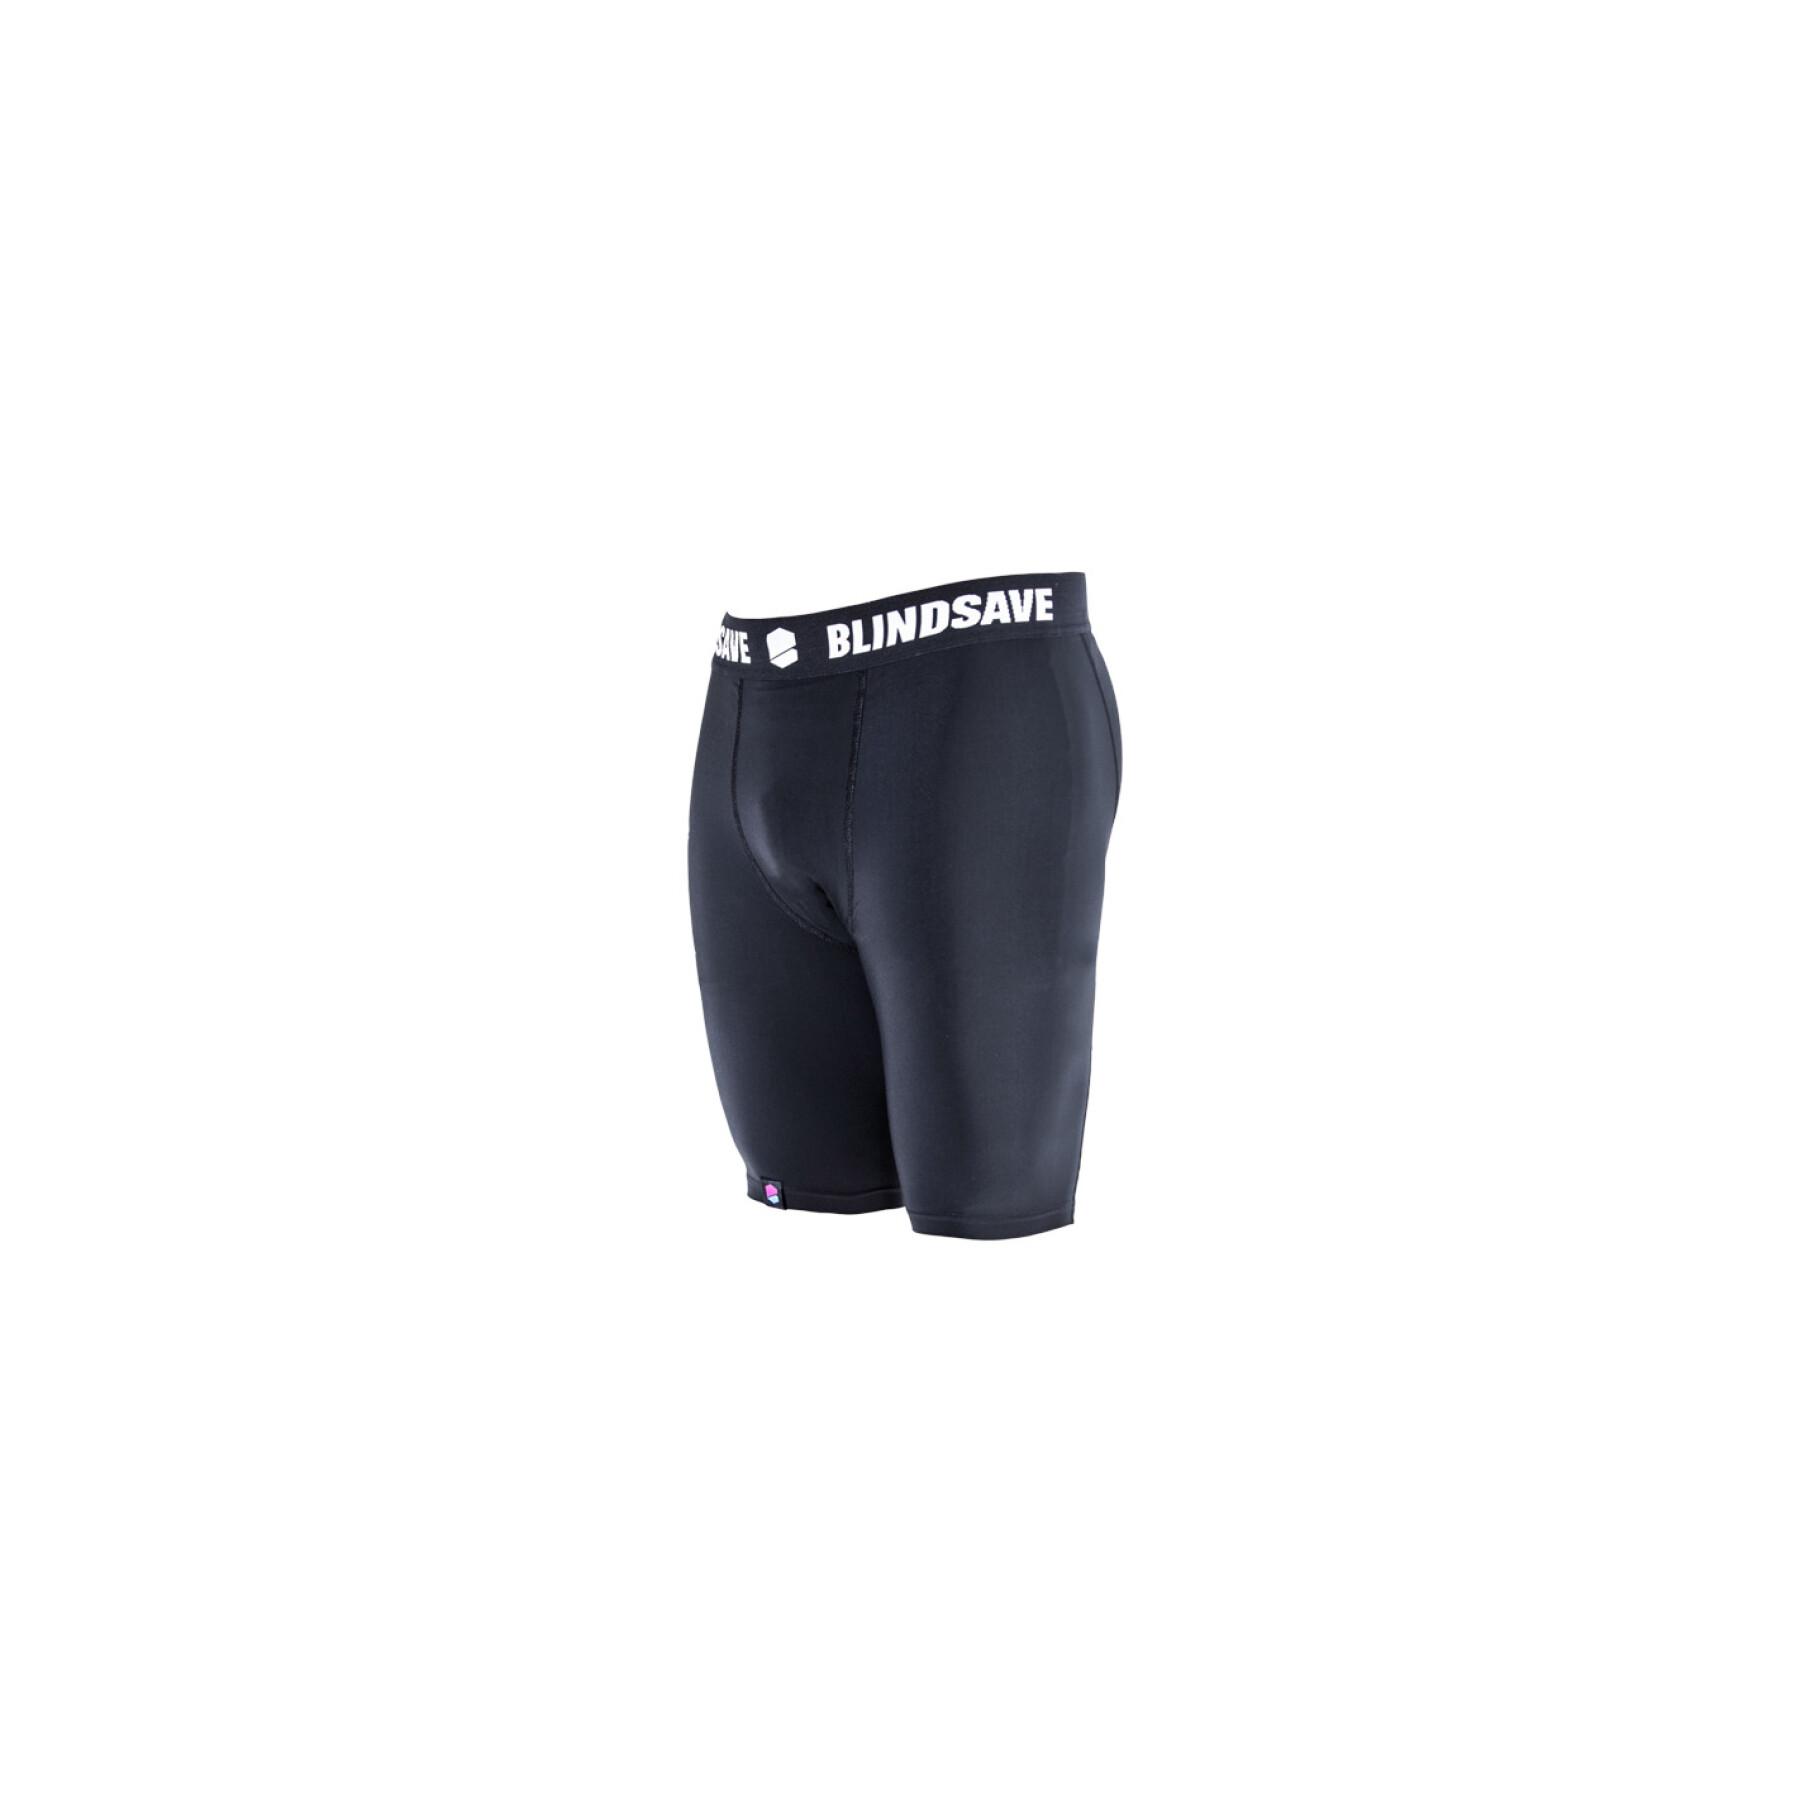 Blindsave Padded compression shorts PRO + Cup